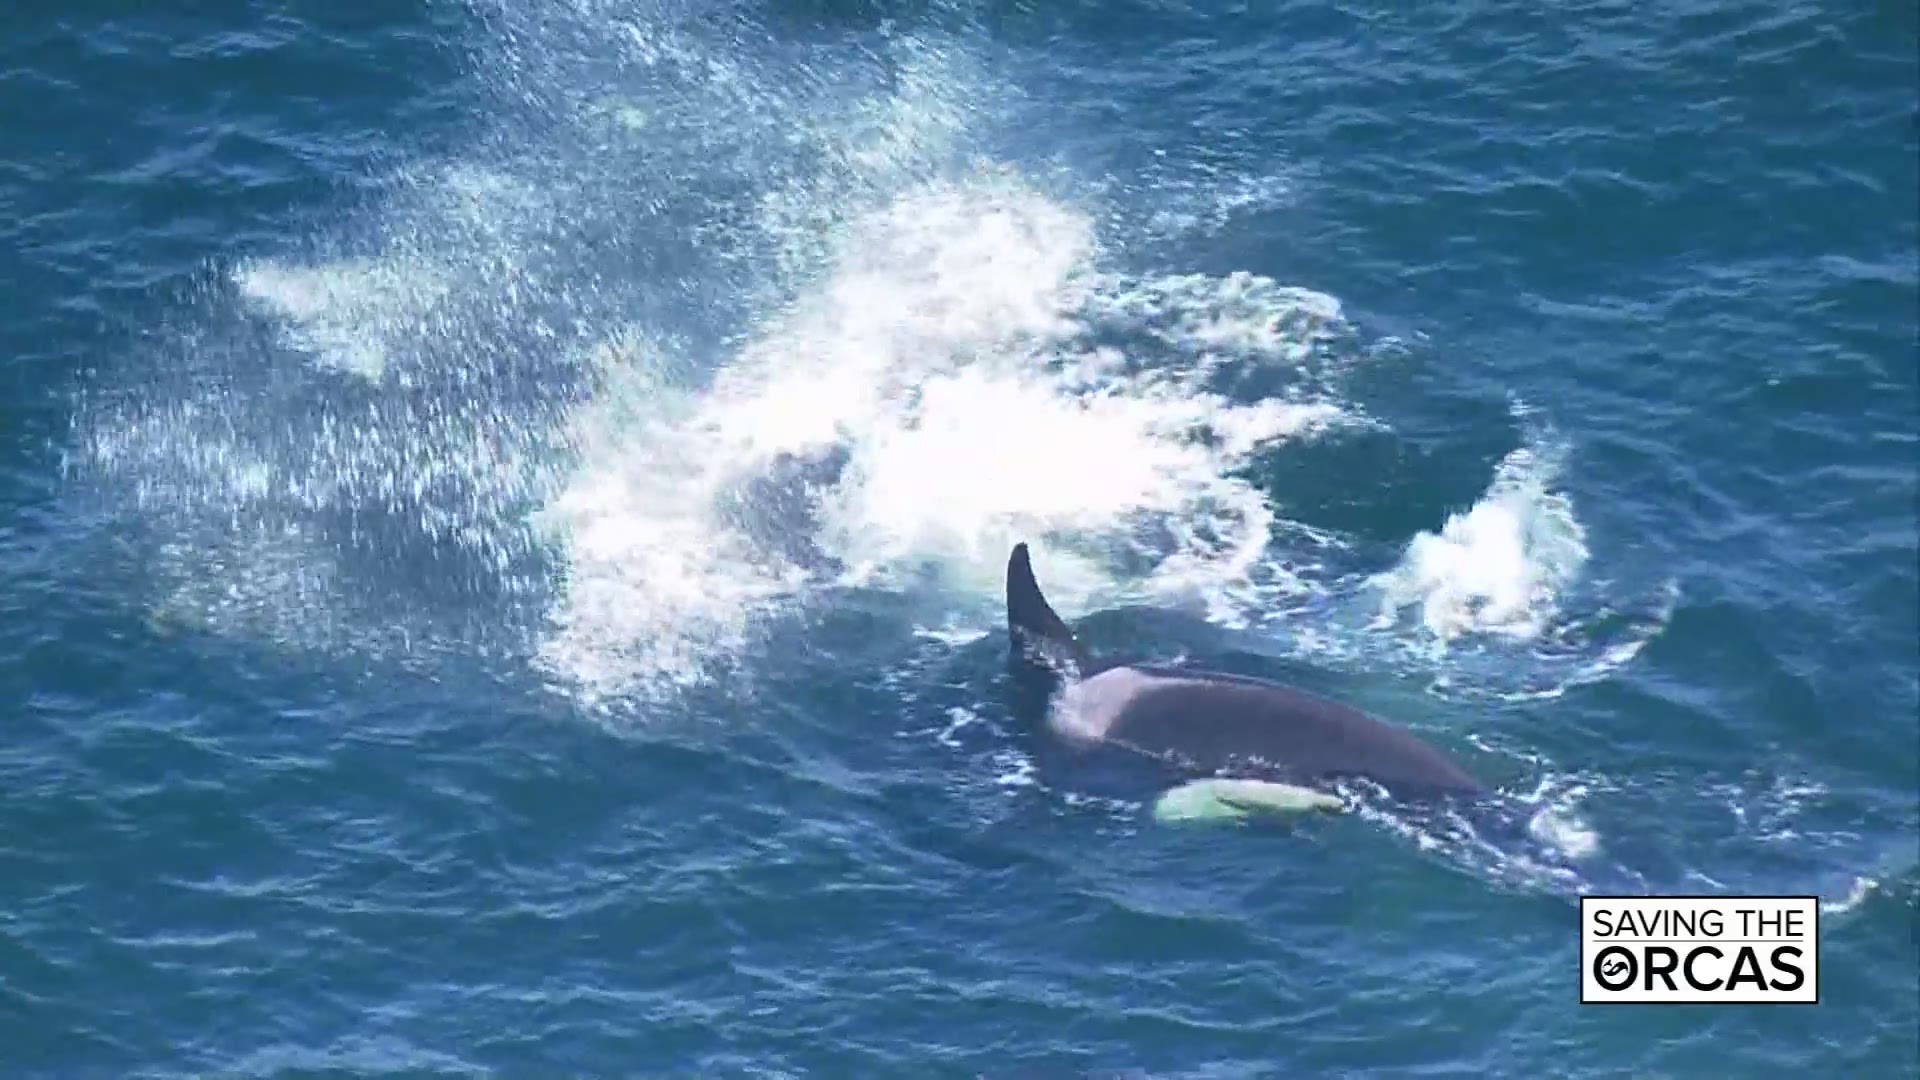 A KING 5 special presentation explores the three reasons why the Southern Resident killer whales aren’t flourishing and how we can help boost the population.